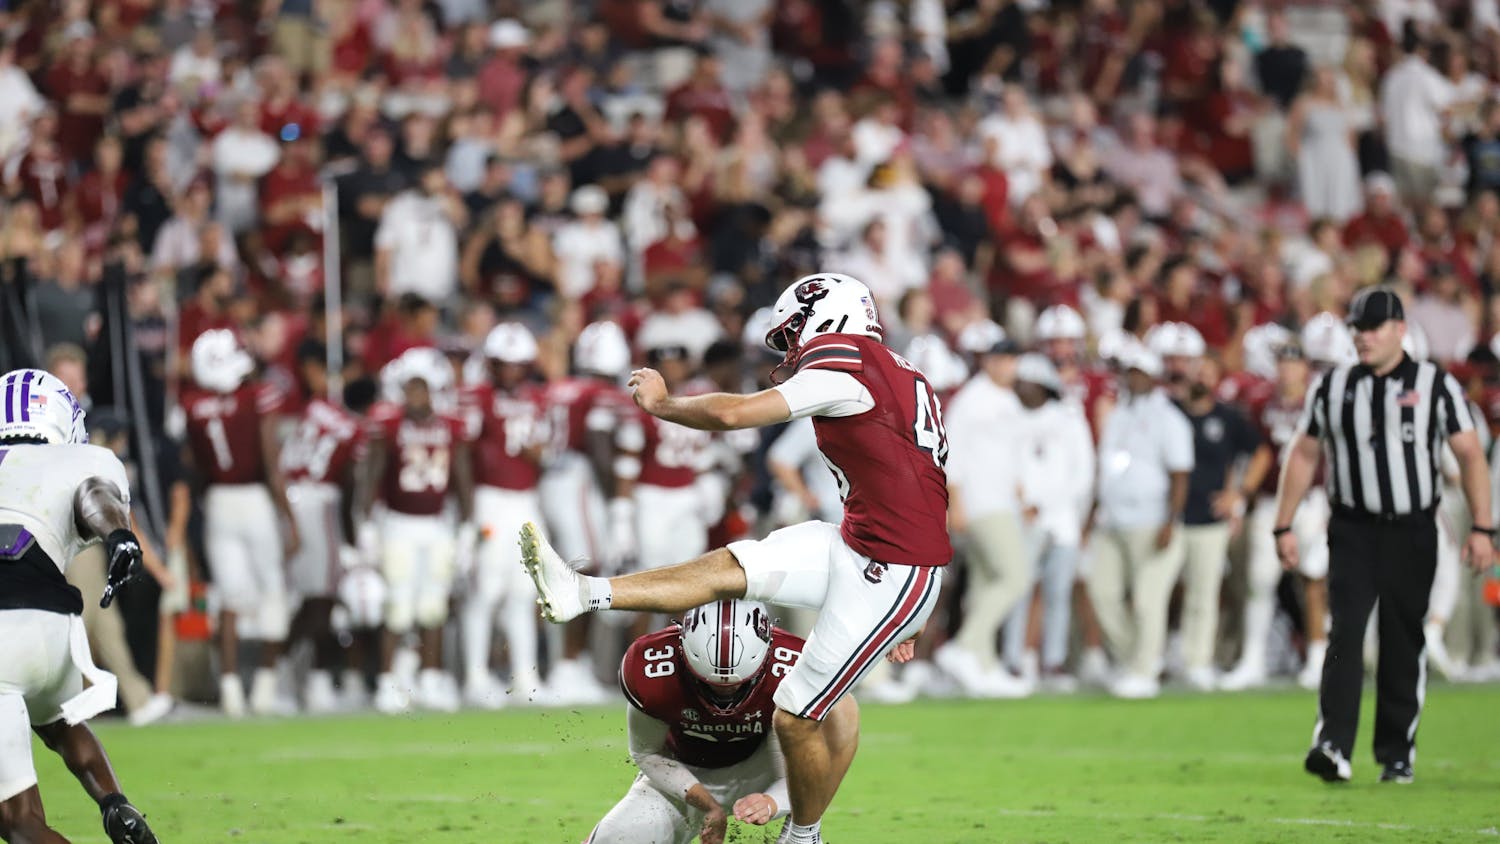 Redshirt senior placekicker Alex Herrera converts on his first extra point attempt of the year after a South Carolina touchdown in the second half of the game. South Carolina defeated Furman 47-21 in its first home game of the season.